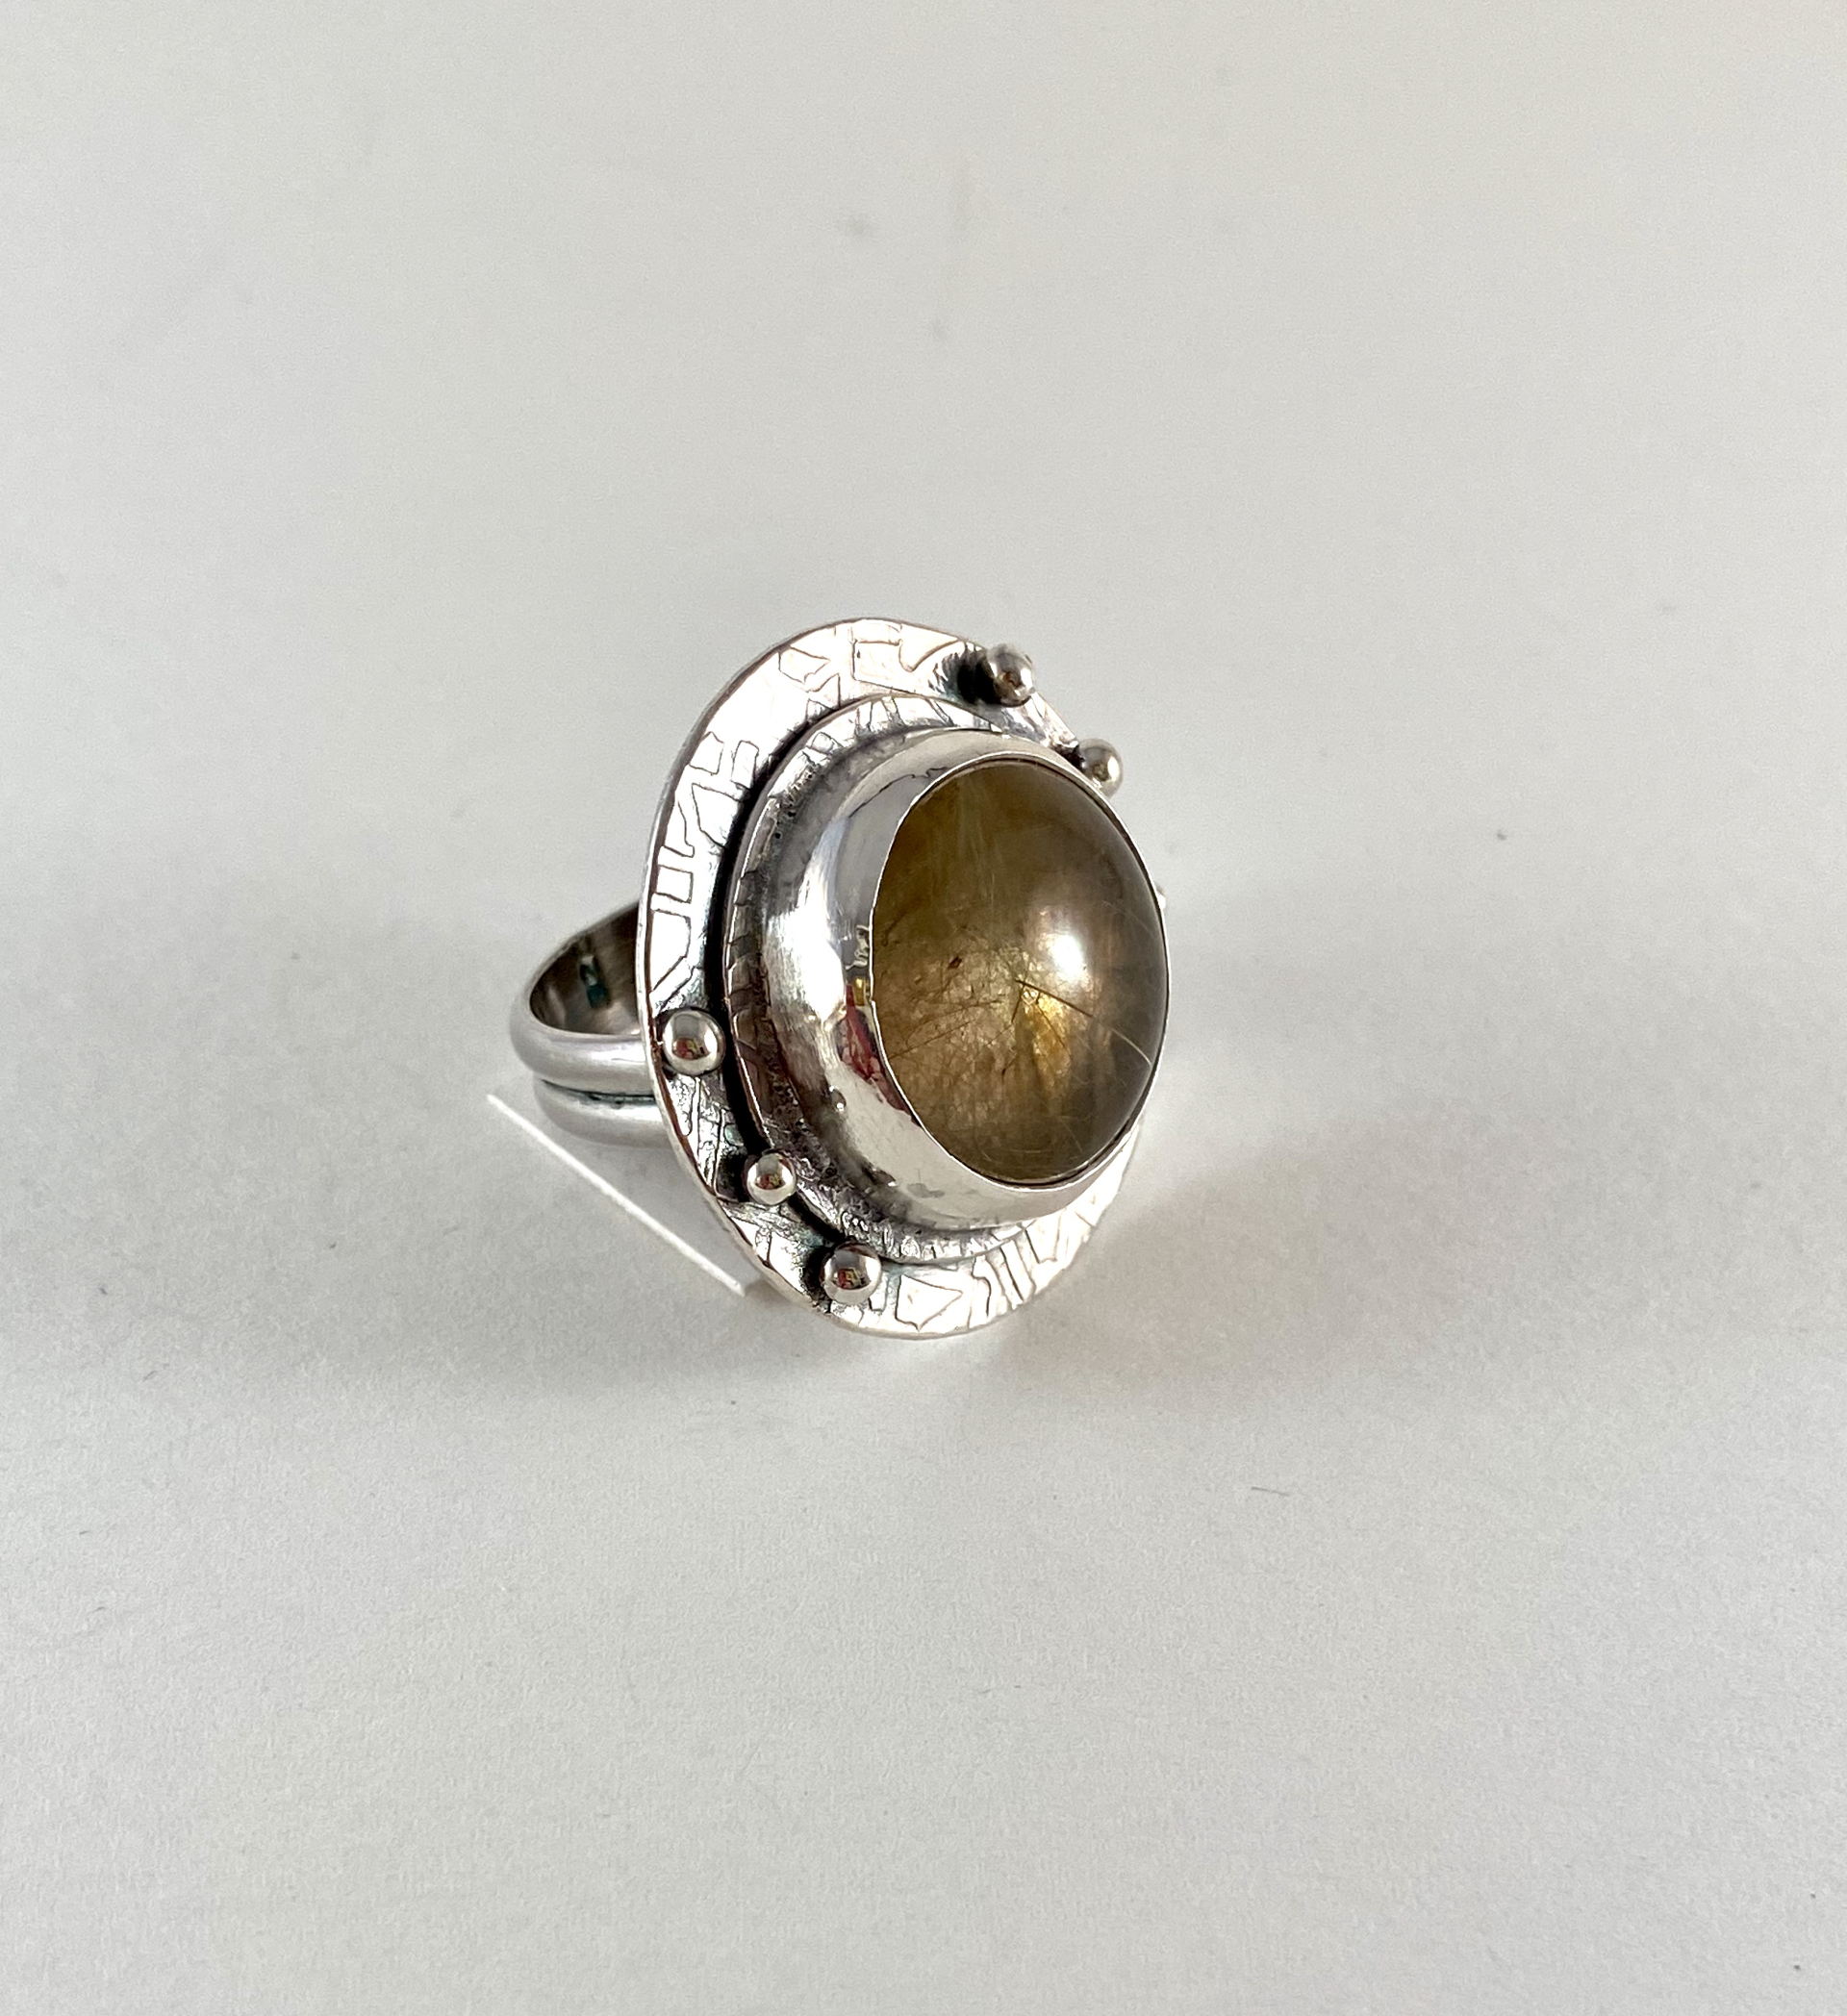 Silver and Rutilated Quartz Space Ship Ring, sz 8 by Anne Bivens